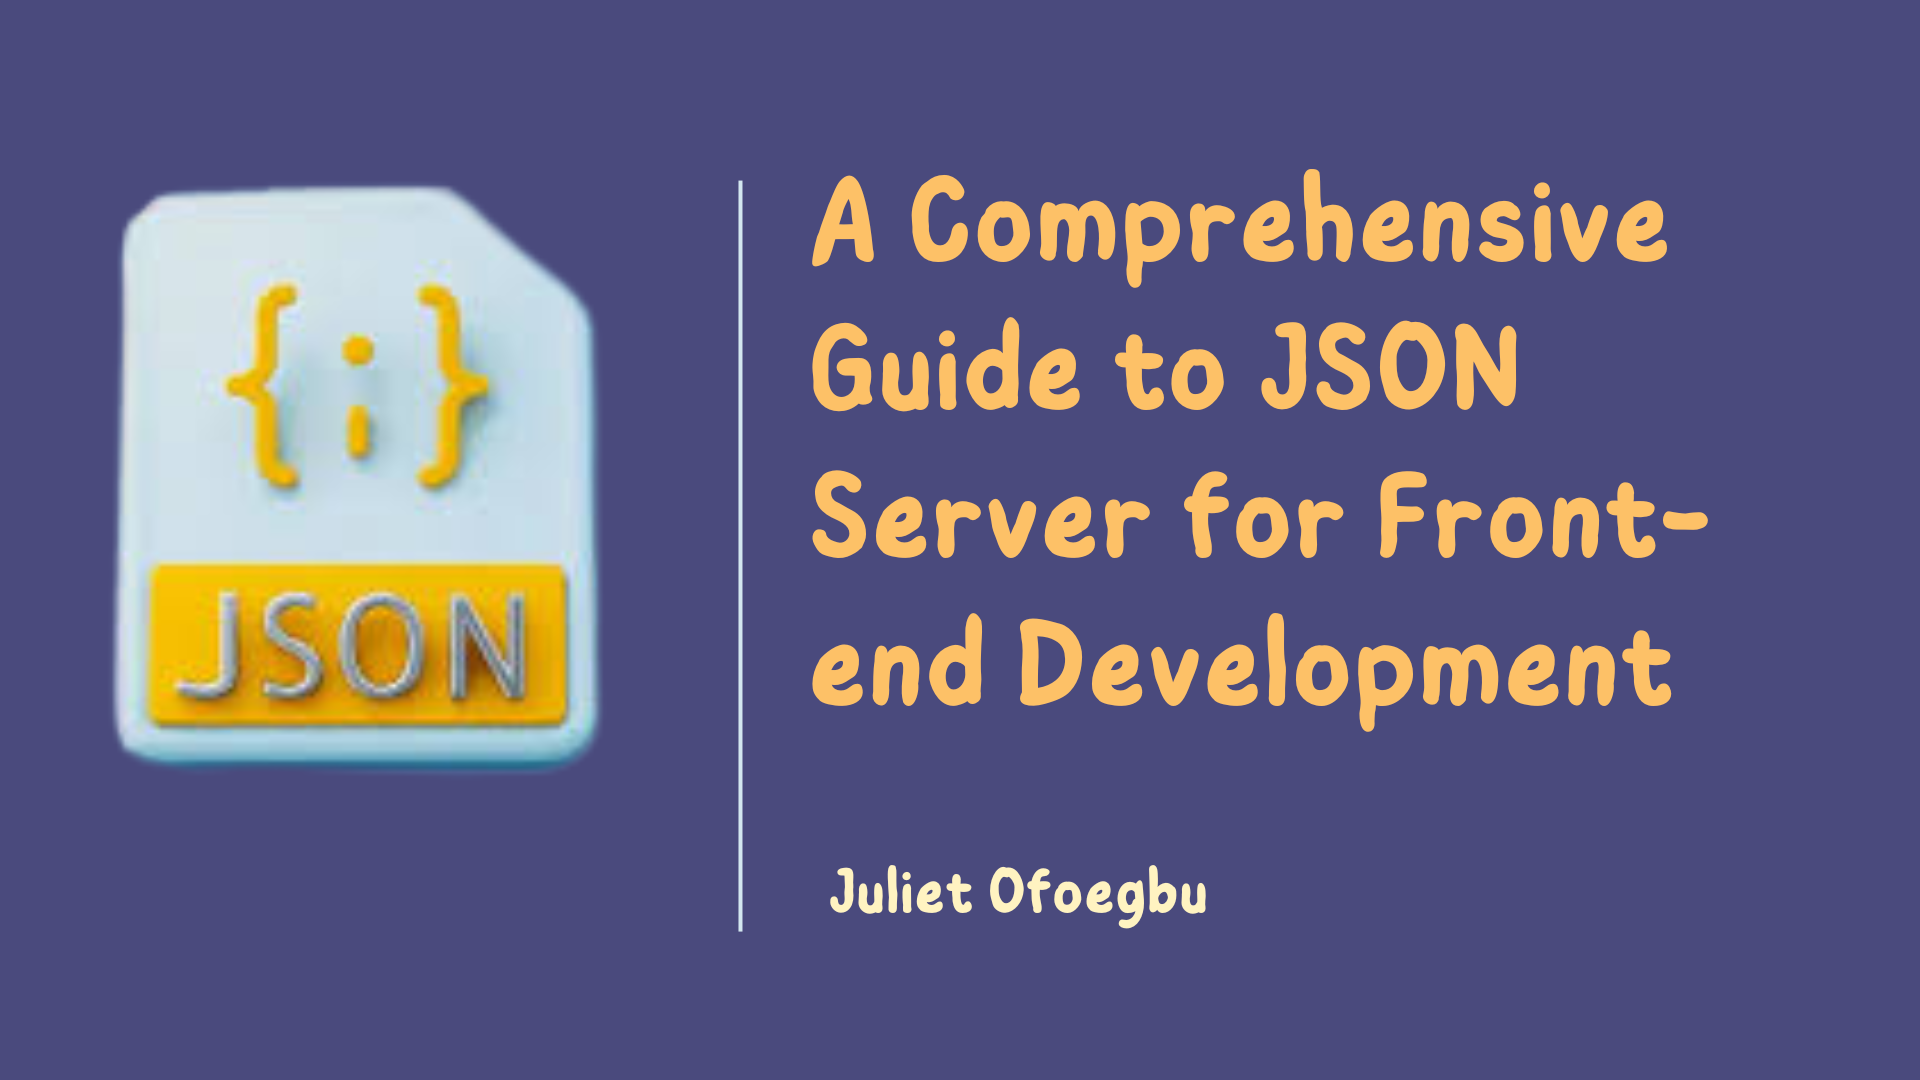 How to Use JSON Server for Front-end Development